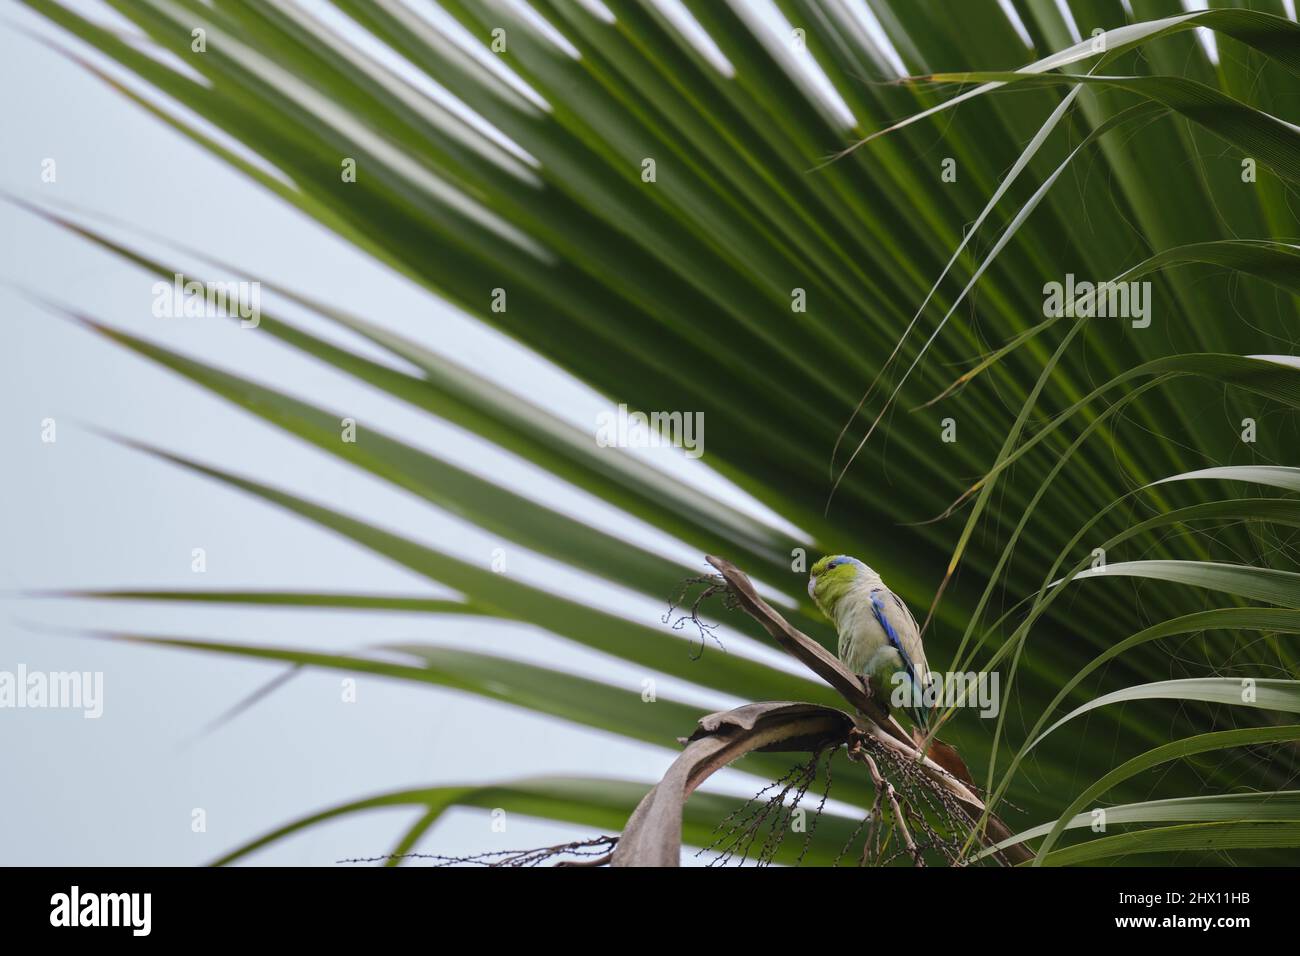 Pacific Parrotlet (Forpus coelestis), perched on the branch of a tall palm tree. Stock Photo